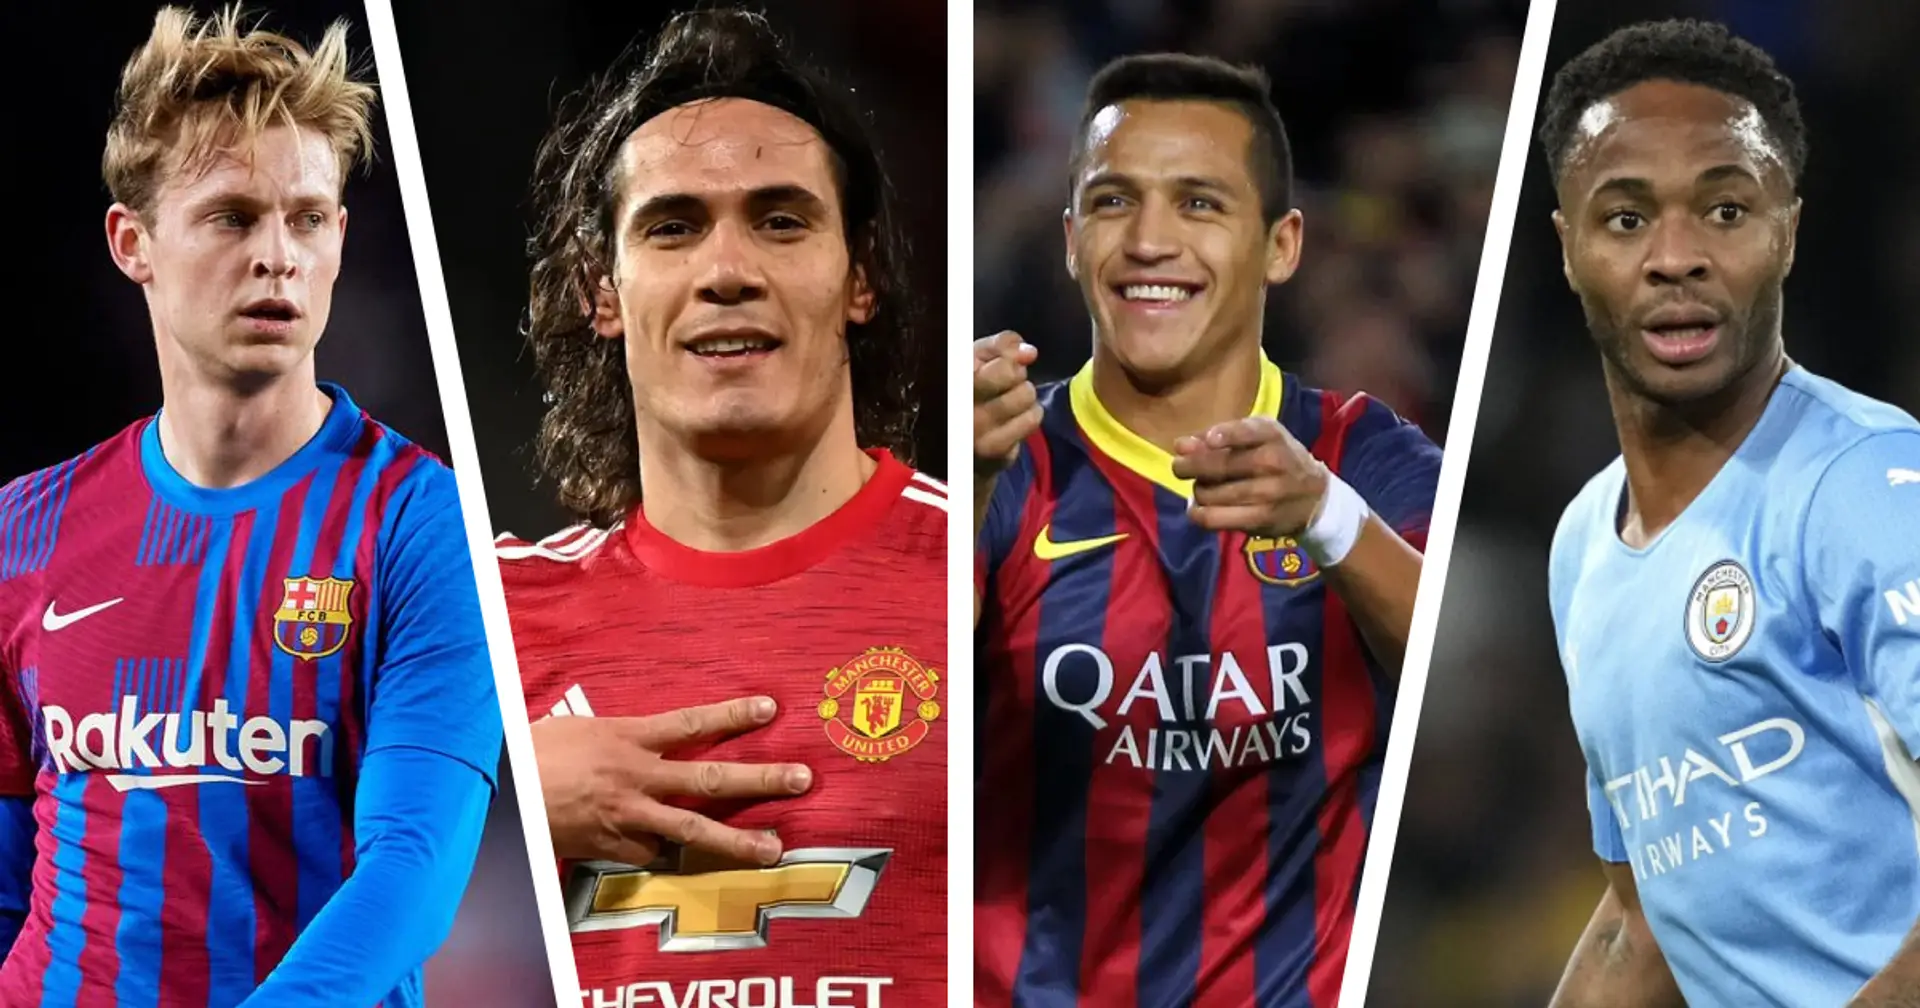 Alexis Sanchez in, update on Cavani, 11 others: Barca's latest transfer round-up with probability ratings